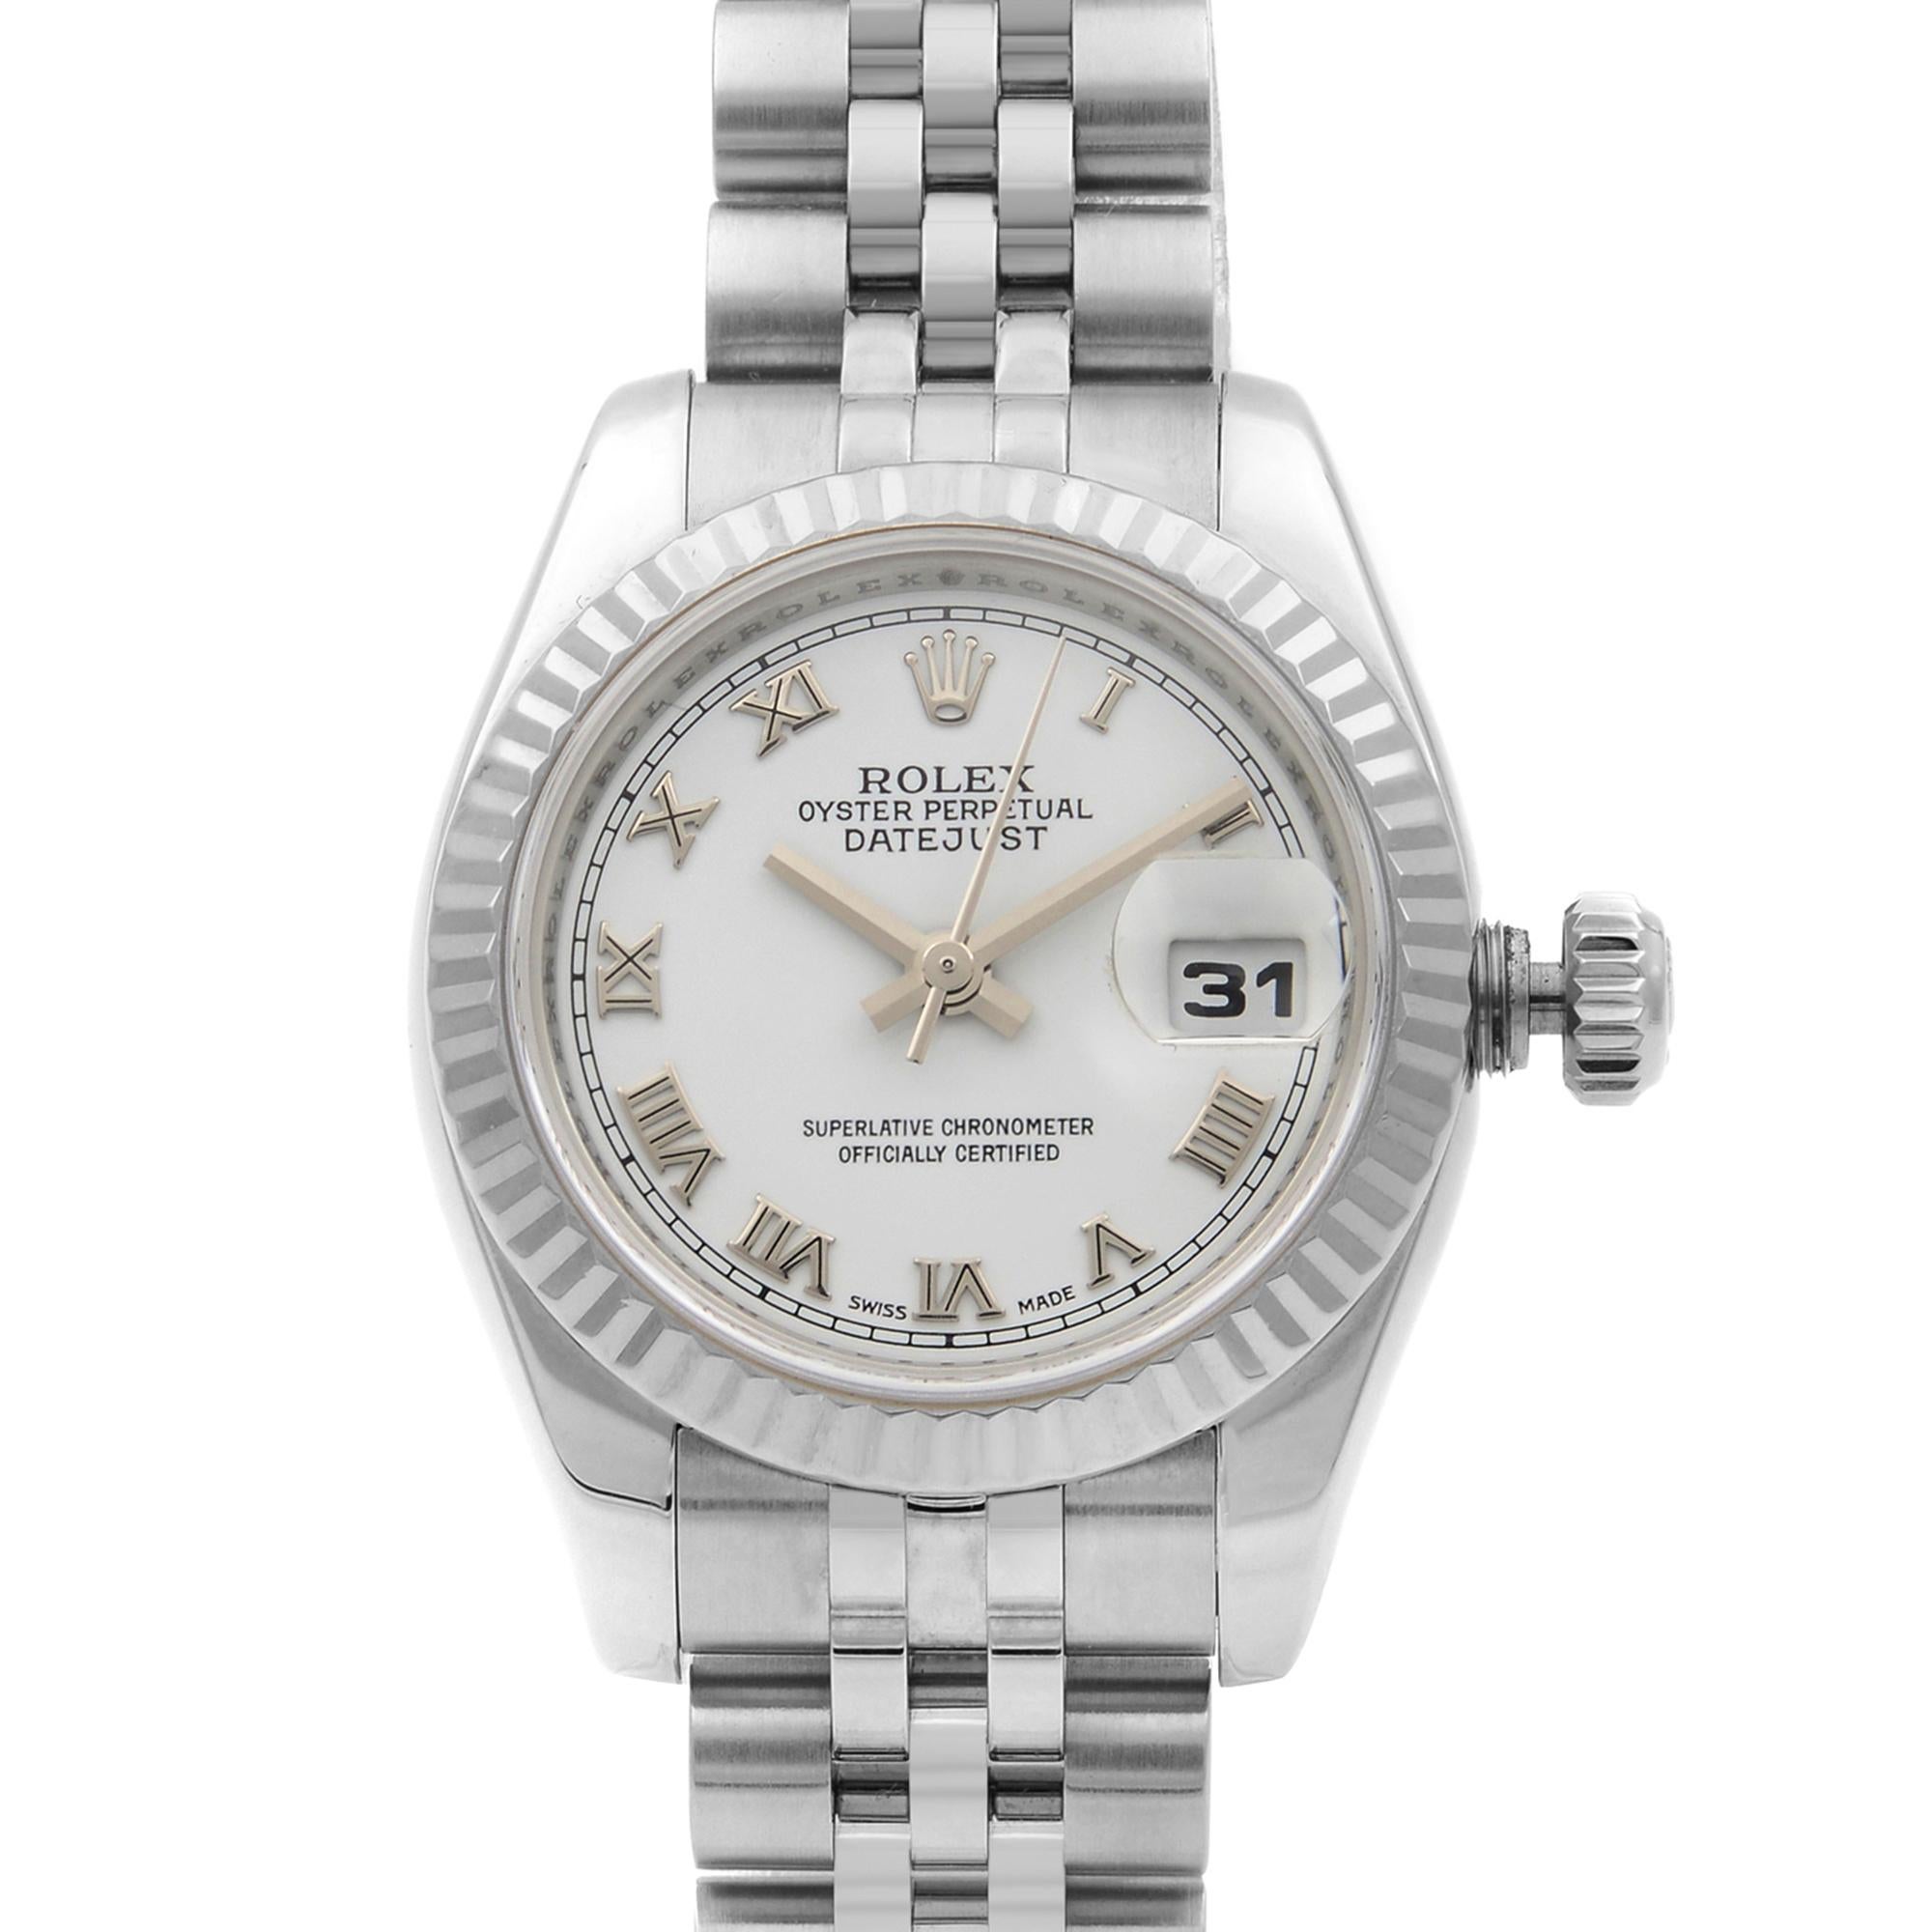 This pre-owned Rolex Datejust  179174 is a beautiful Ladie's timepiece that is powered by mechanical (automatic) movement which is cased in a stainless steel case. It has a round shape face, date indicator dial and has roman numerals style hour